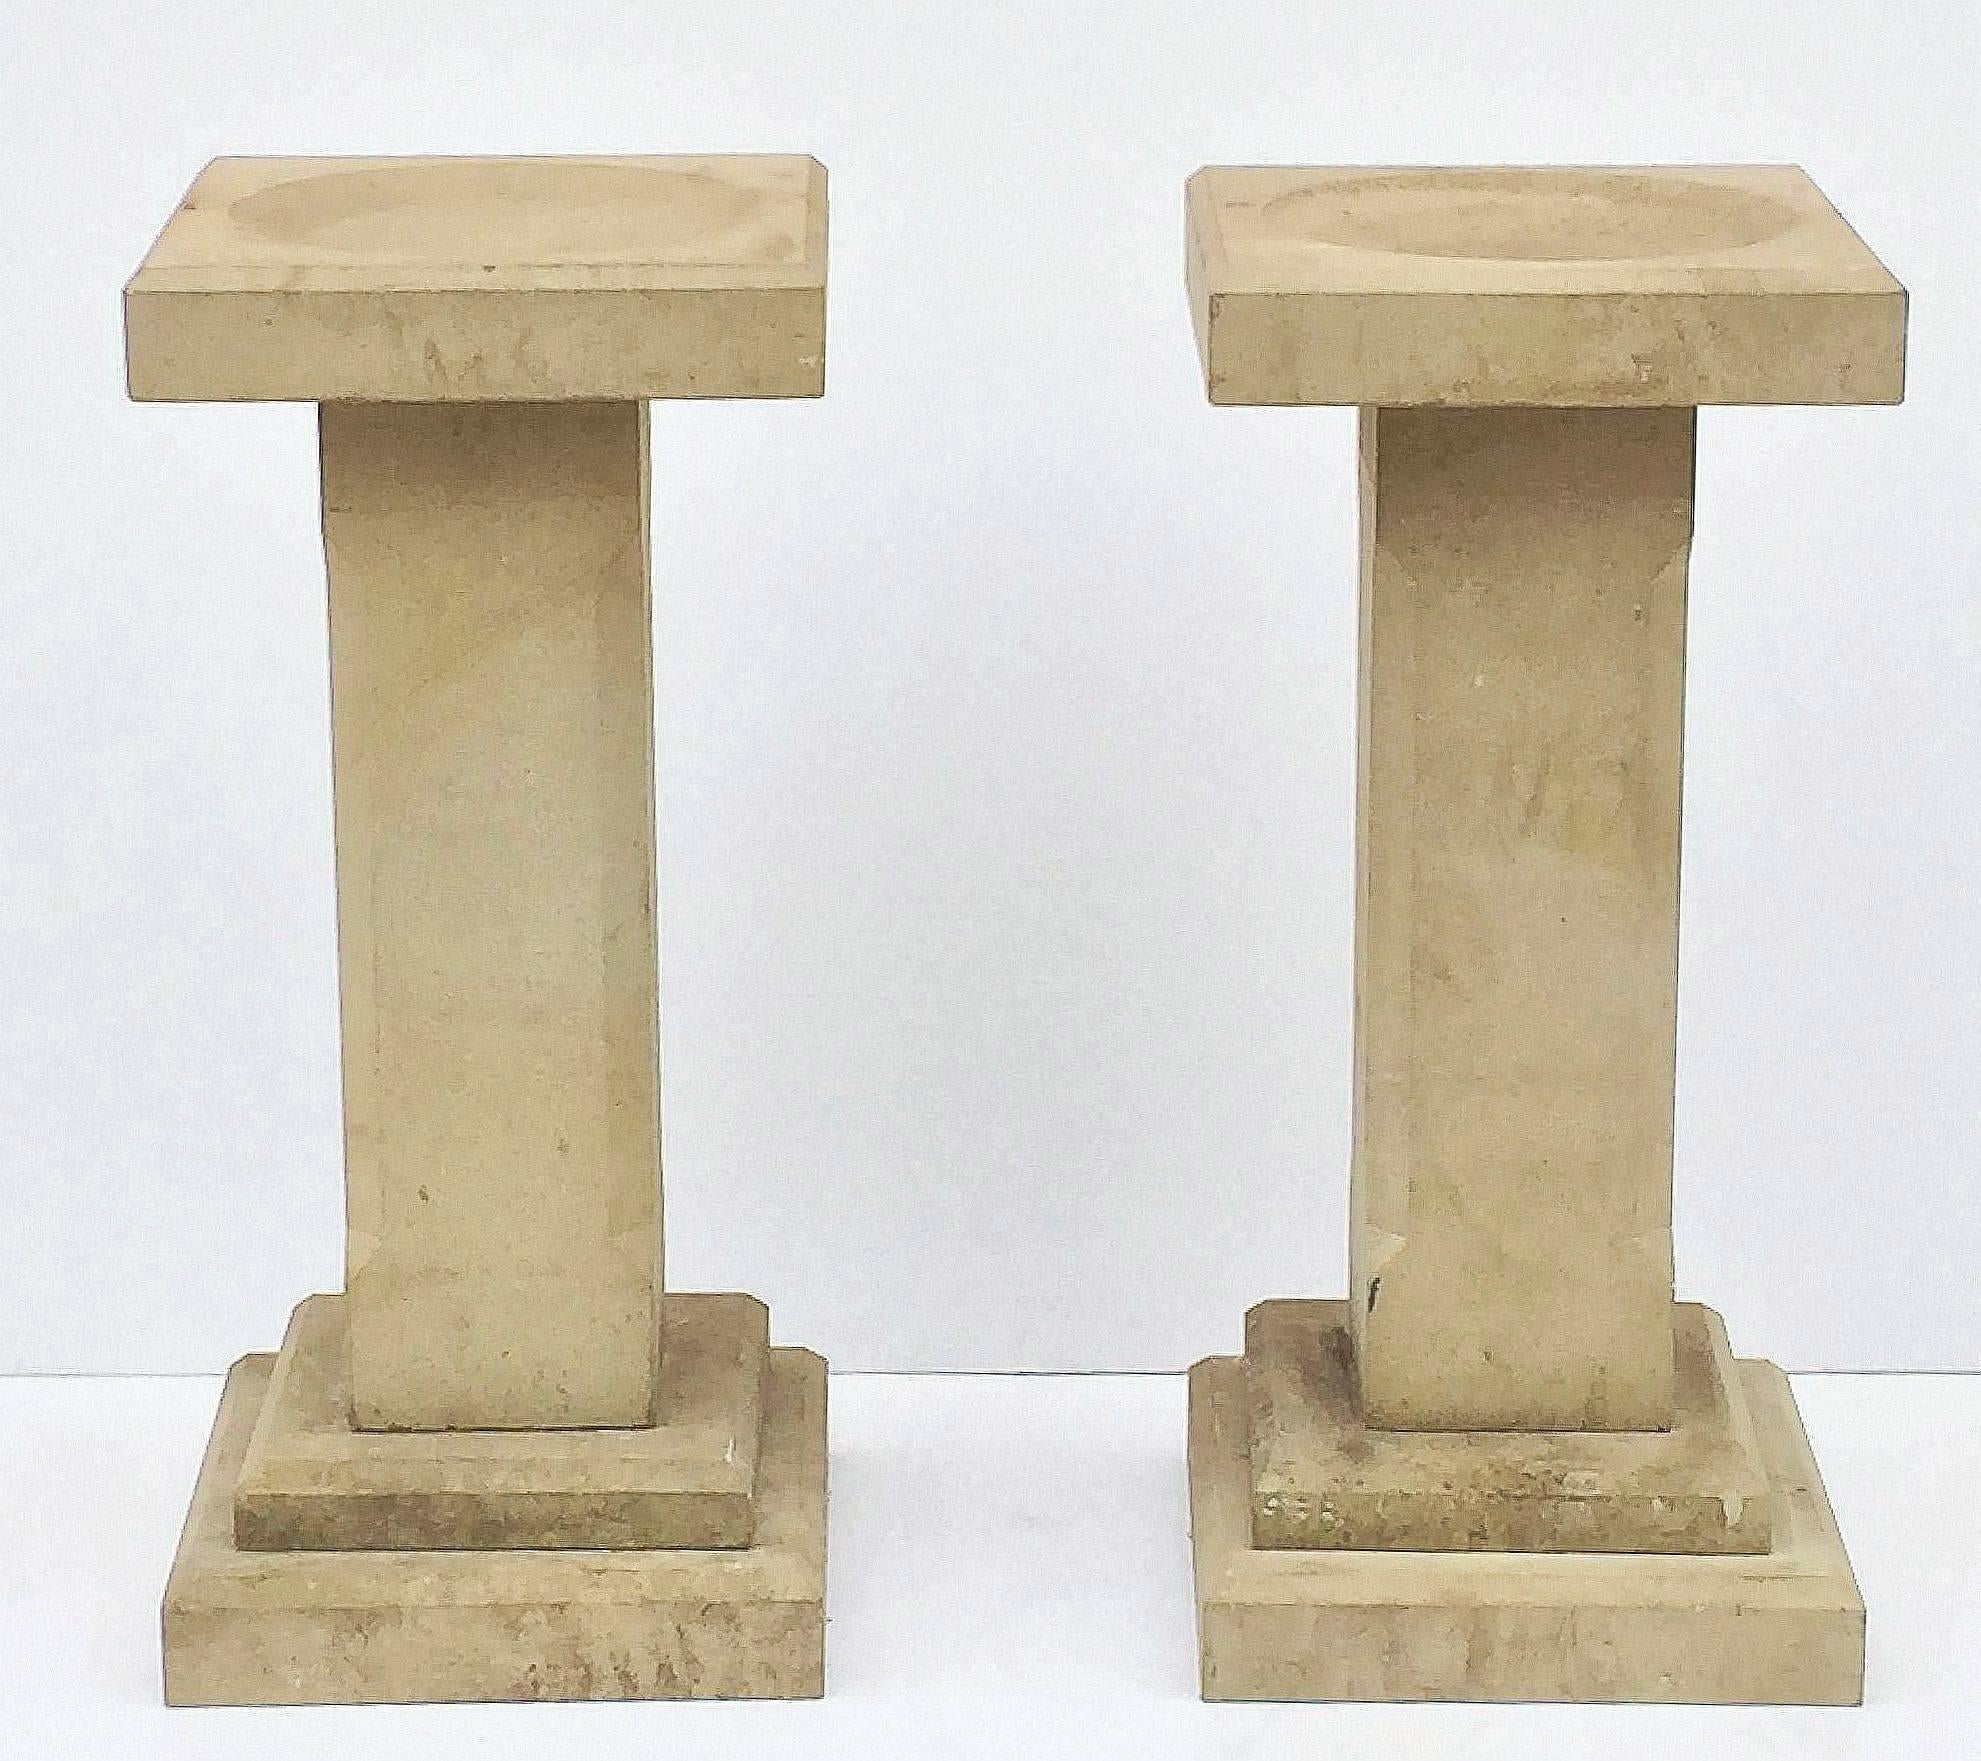 A pair of fine English garden bird baths of sandstone, each featuring a square top with round recessed bath area in the centre, set upon a chamfered column pedestal with square plinth base.

Dimensions:

H 33 1/4